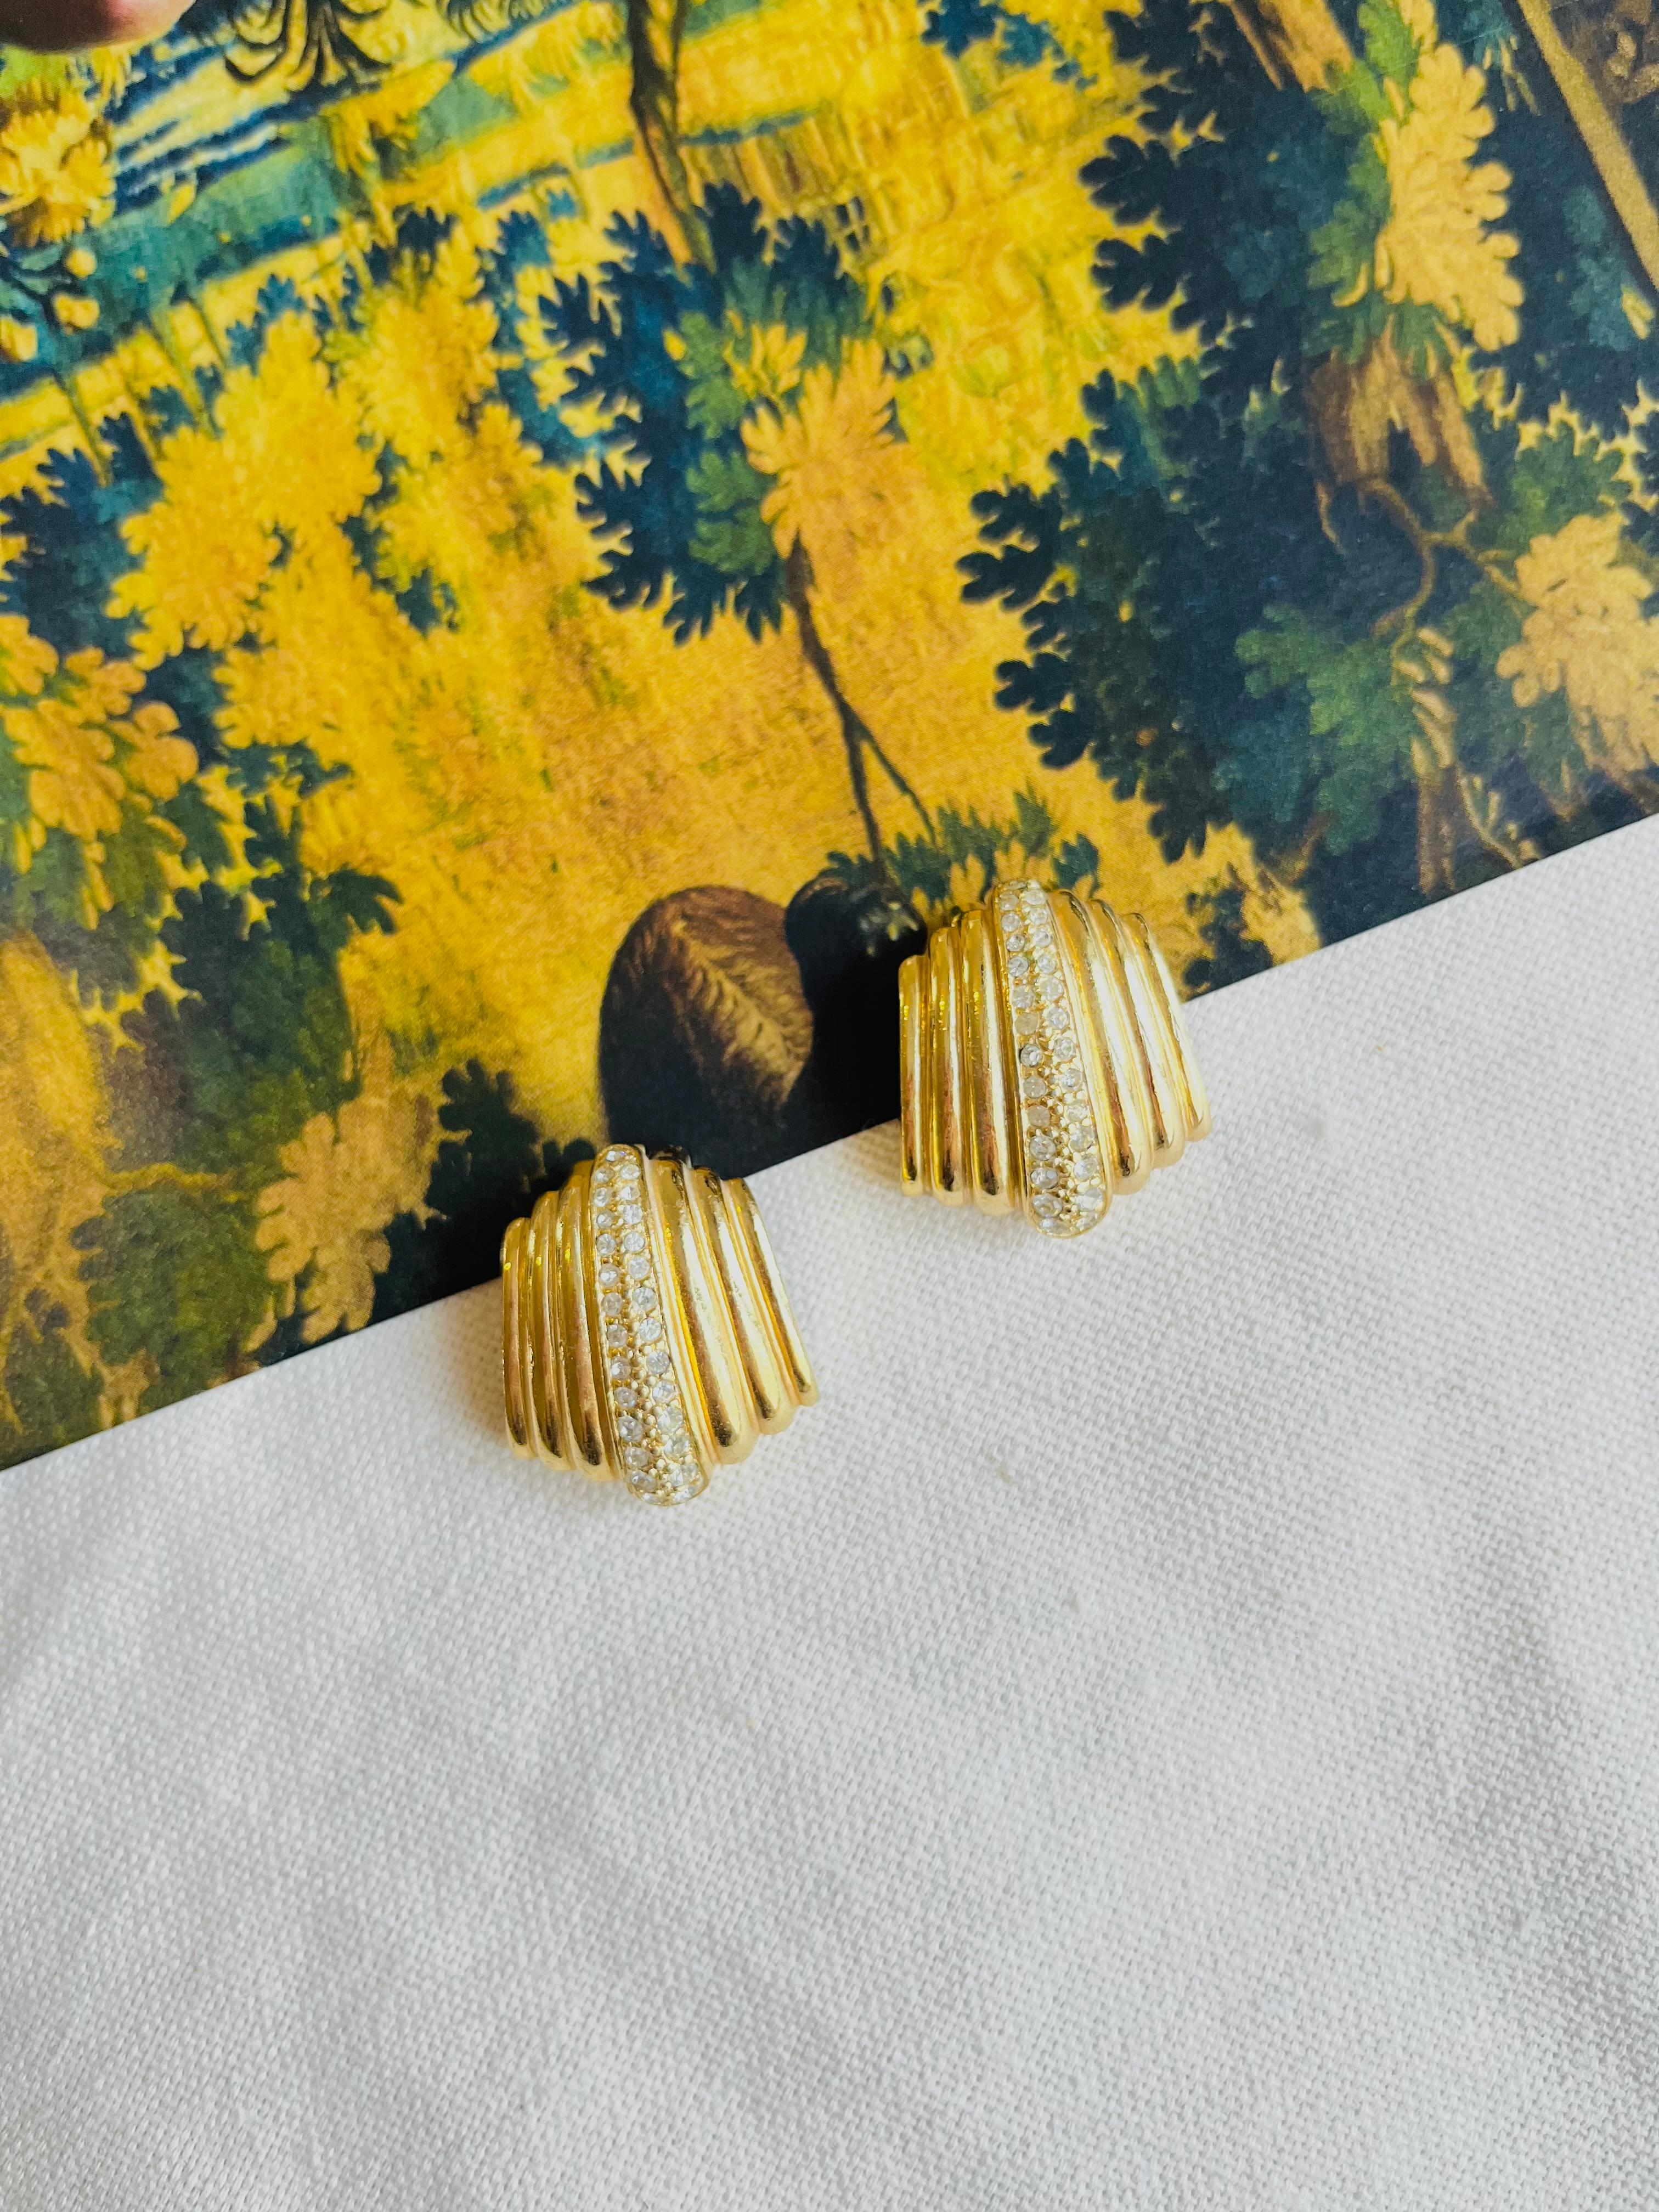 Very good condition. Not any colour loss. Very light scratches, barely noticeable. 100% Genuine.

A very beautiful pair of earrings by Chr. DIOR, signed at the back.

Size: 2.6*2.3 cm.

Weight: 12.0 g/each.

_ _ _

Great for everyday wear. Come with